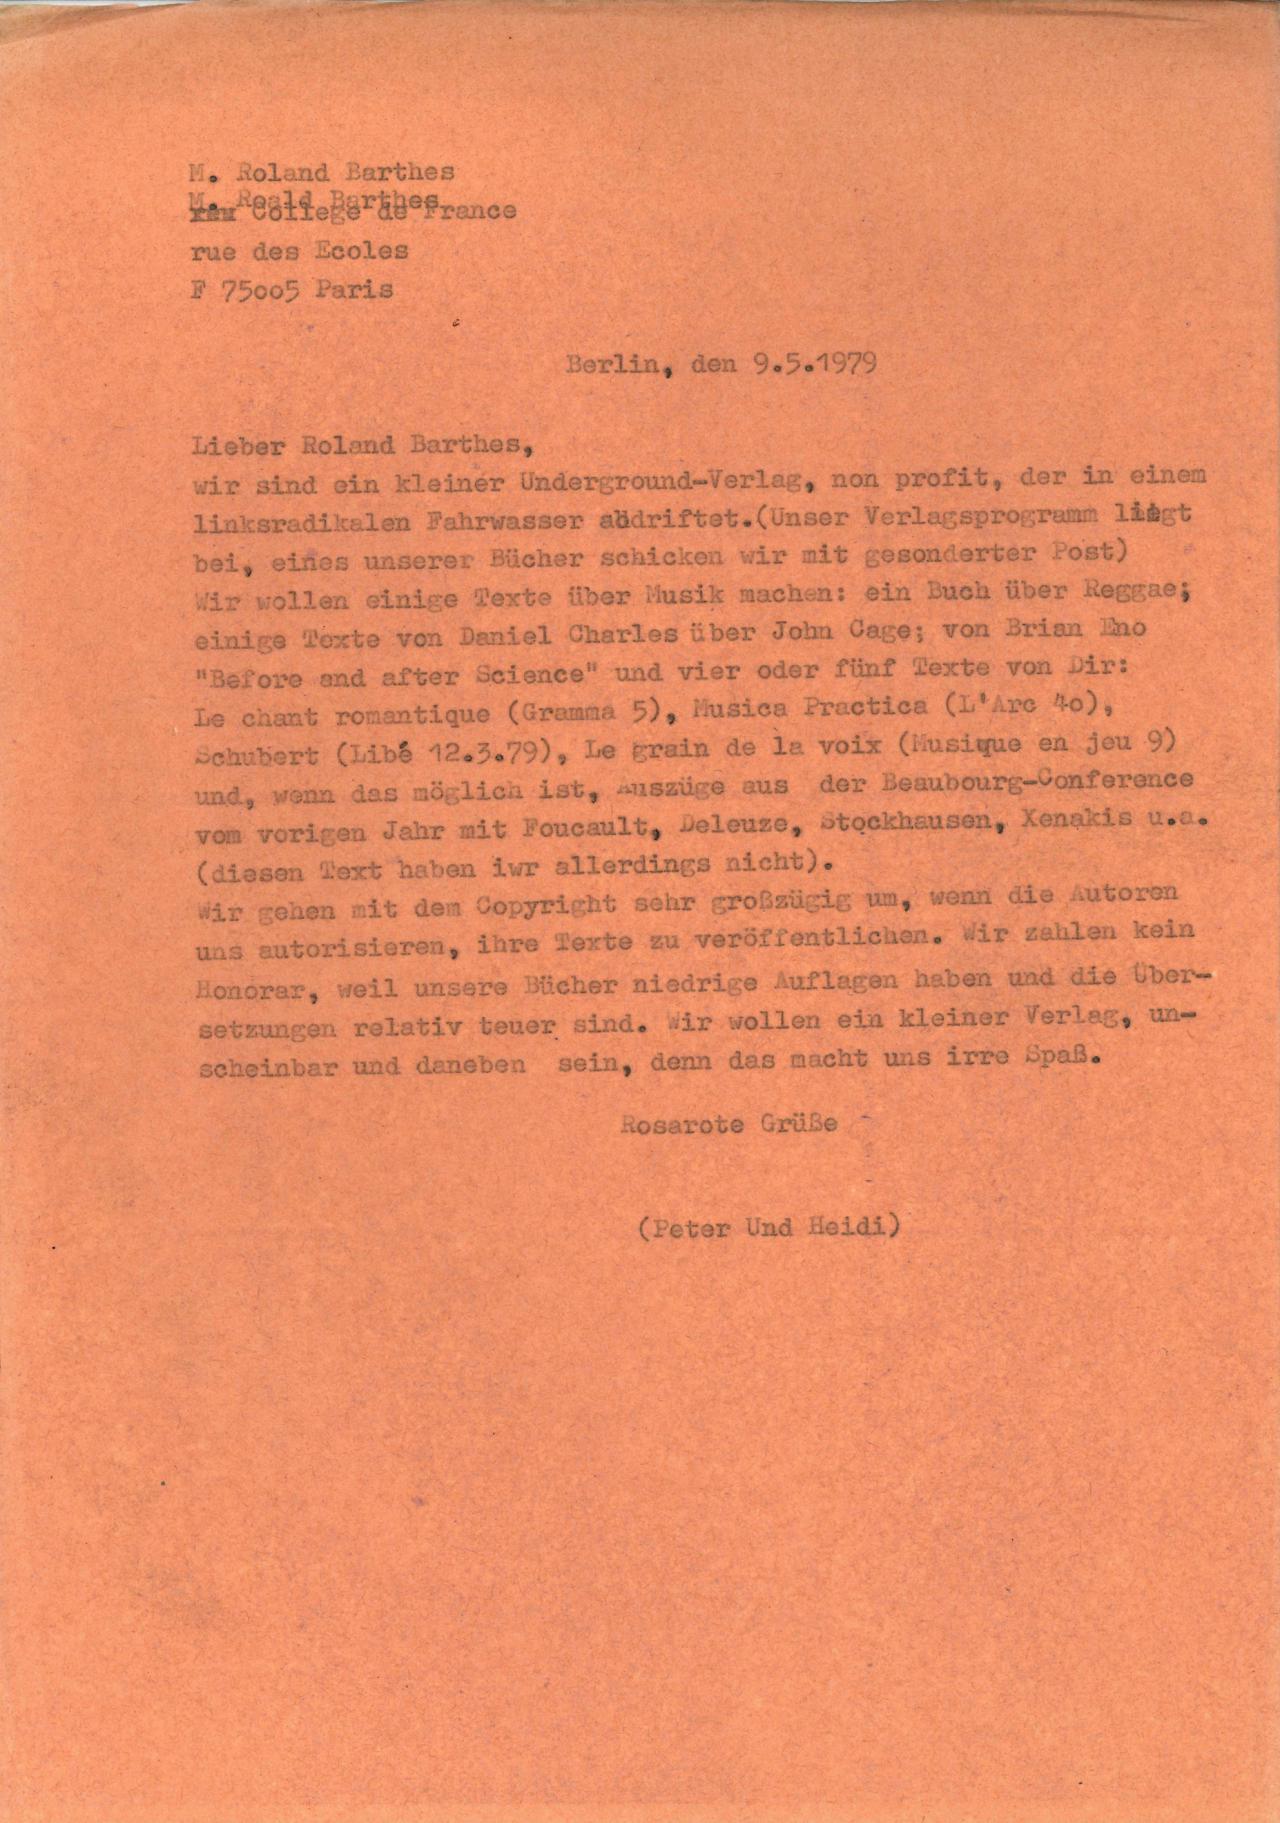 Letter by Merve publisher to Roladn Barthes, 9.5.1979.